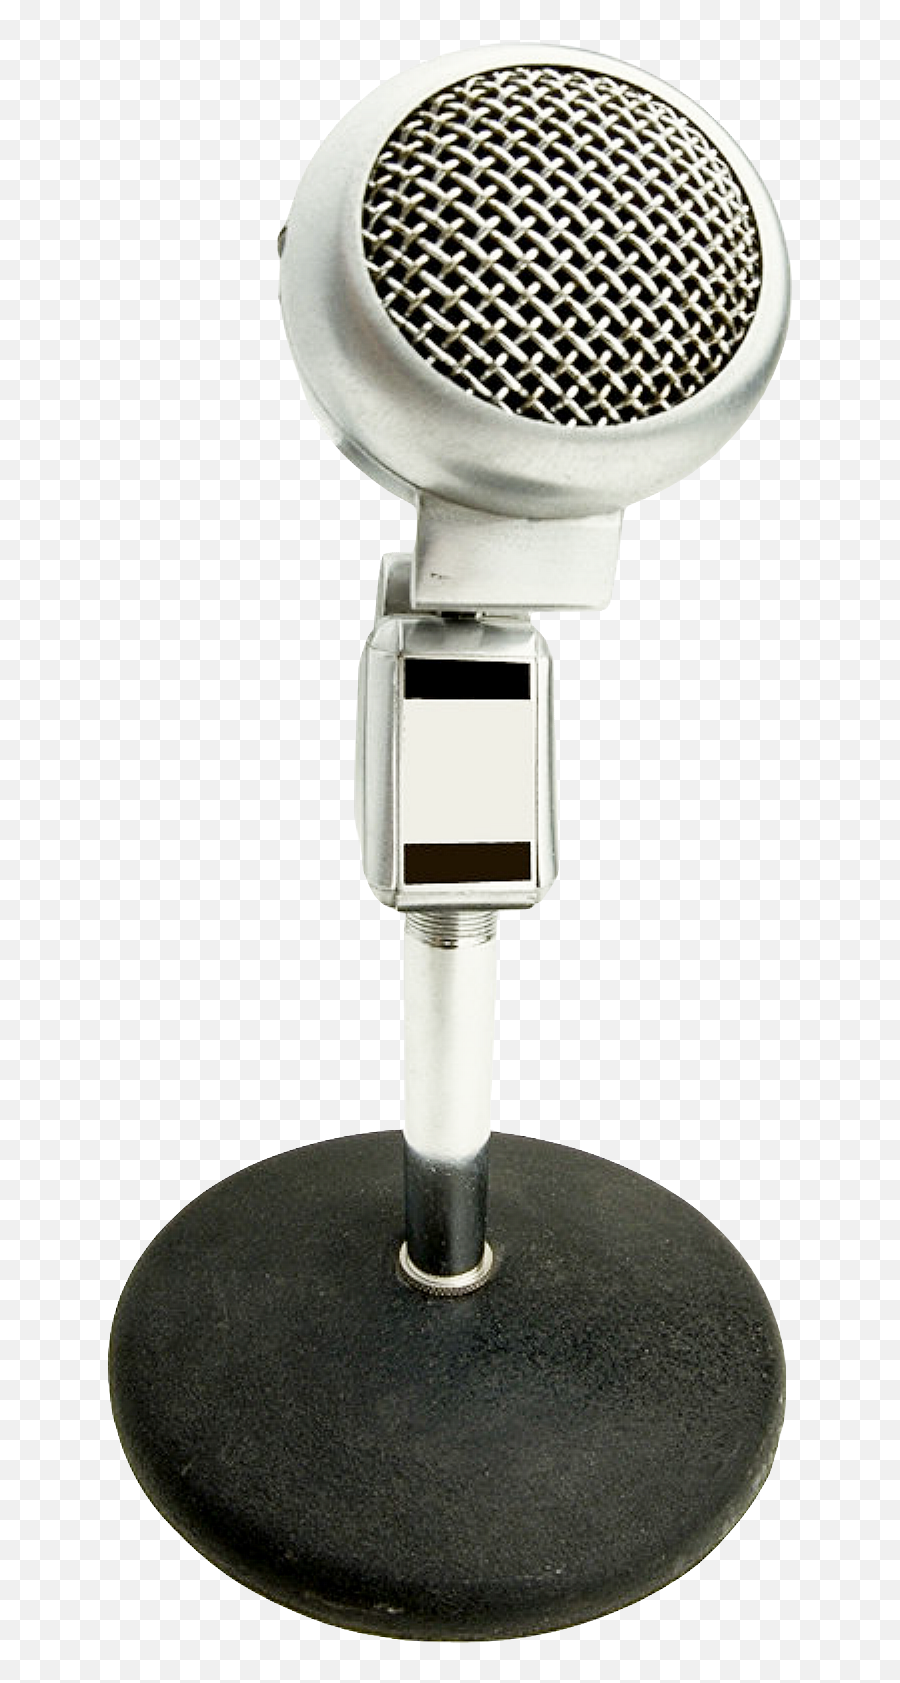 Download Microphone Png Image For Free Stand